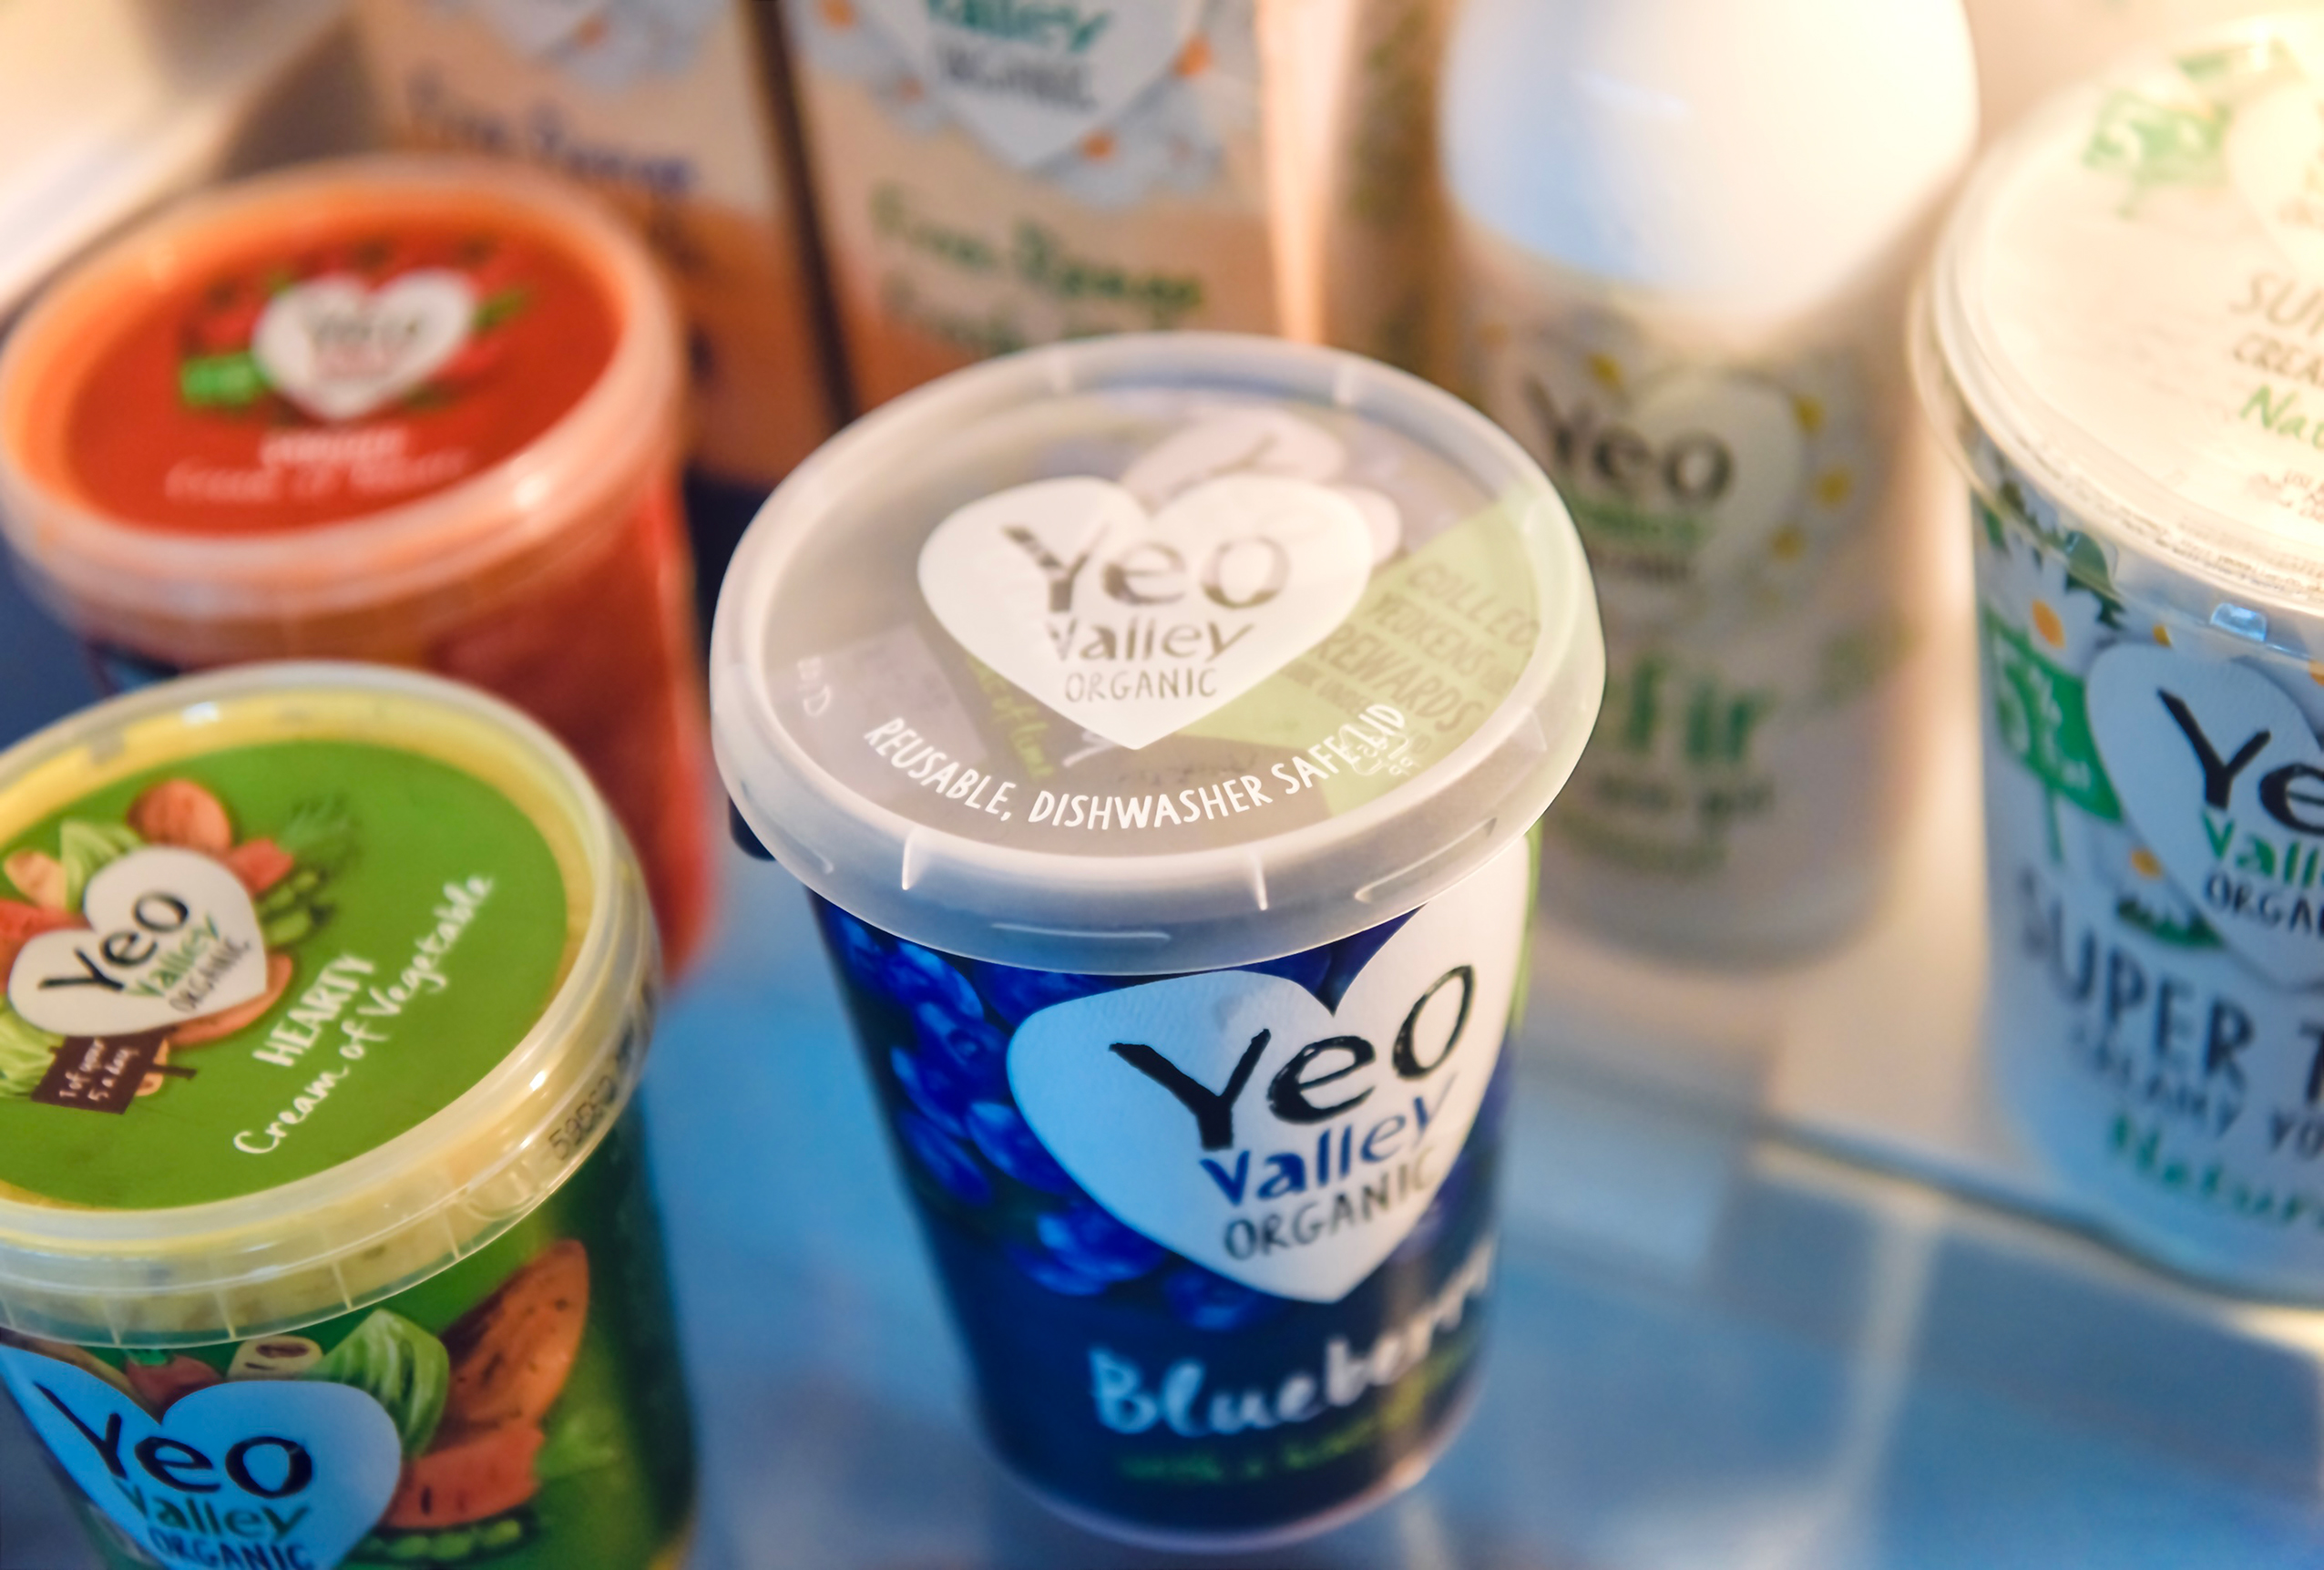 Yeo Valley Organic removes single-use lids